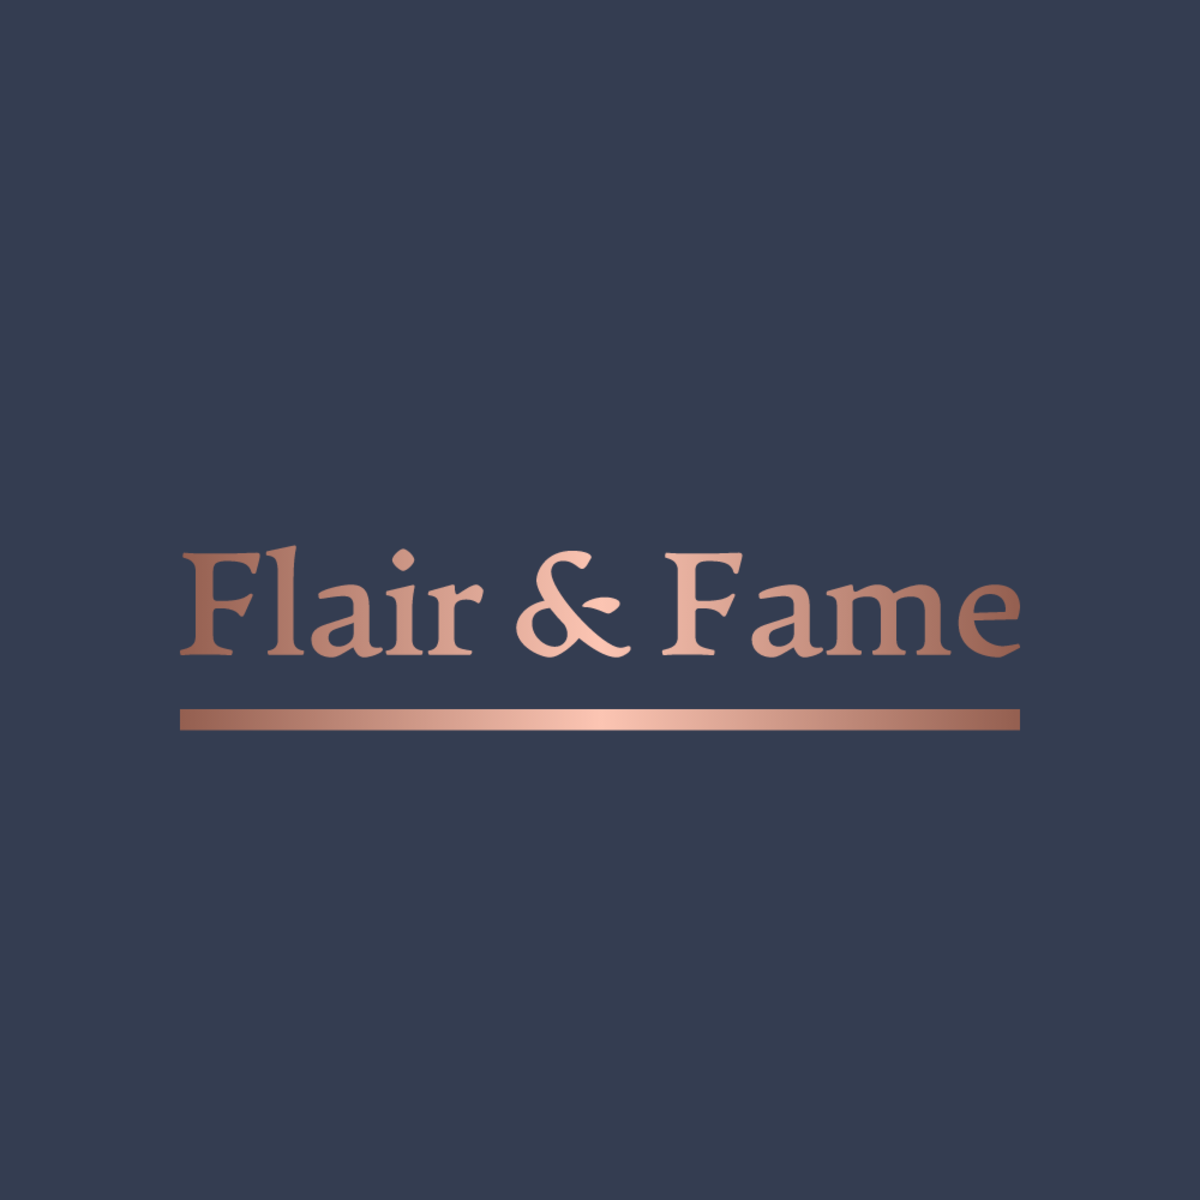 Flair & Fame Partners with Klarna to Offer New Payment Option for Independent Musicians